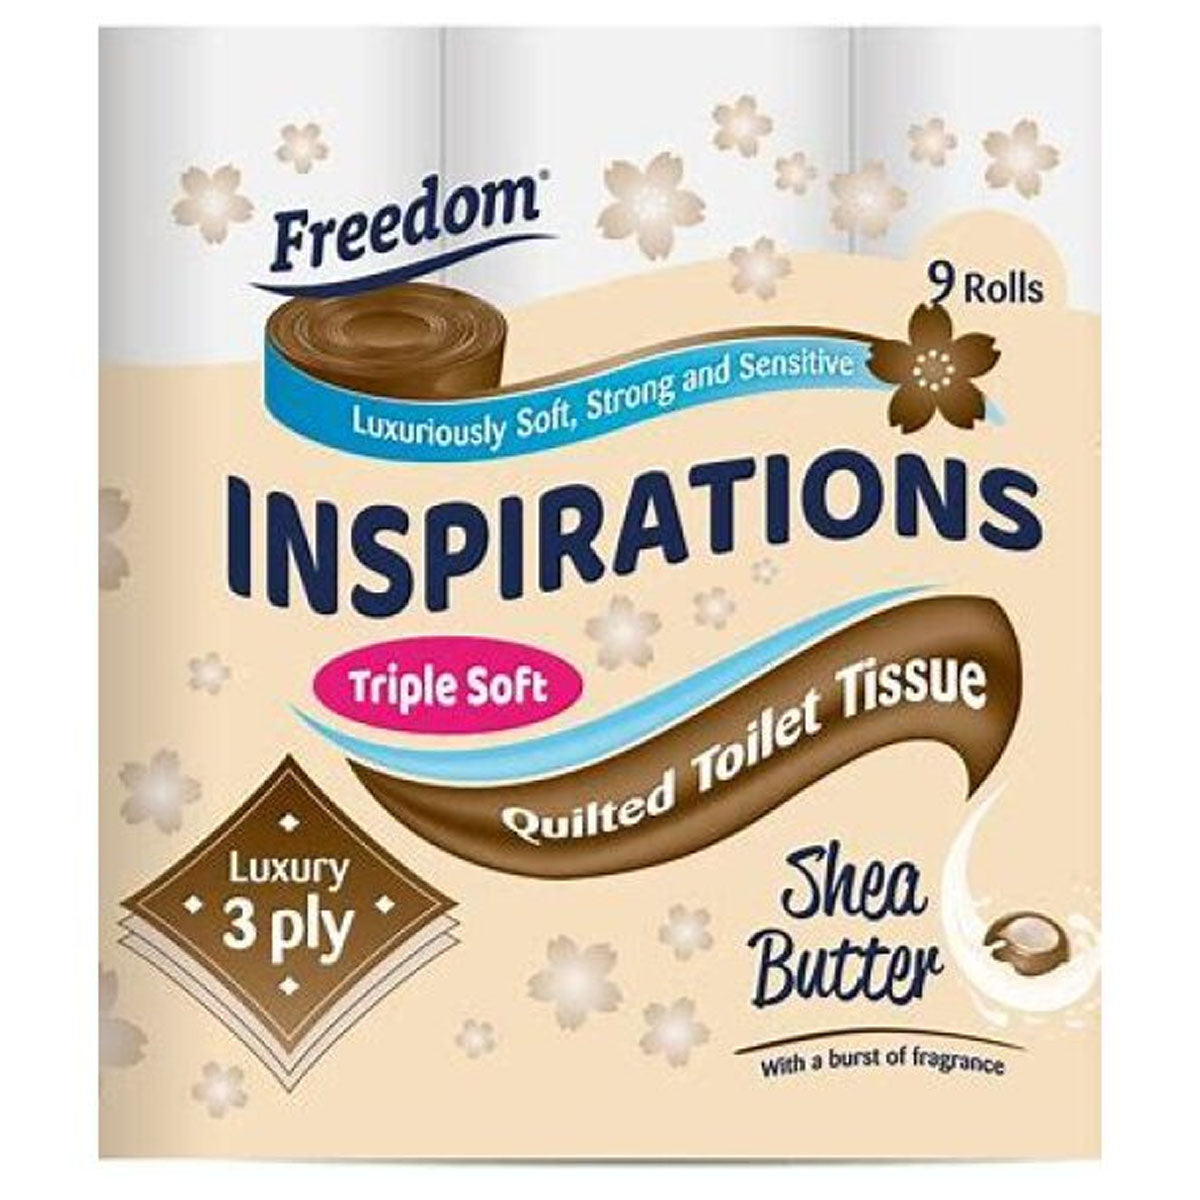 Freedom - Inspiration Triple Soft Quilted Toilet Tissue Shea Butter - 9 Roll - Continental Food Store